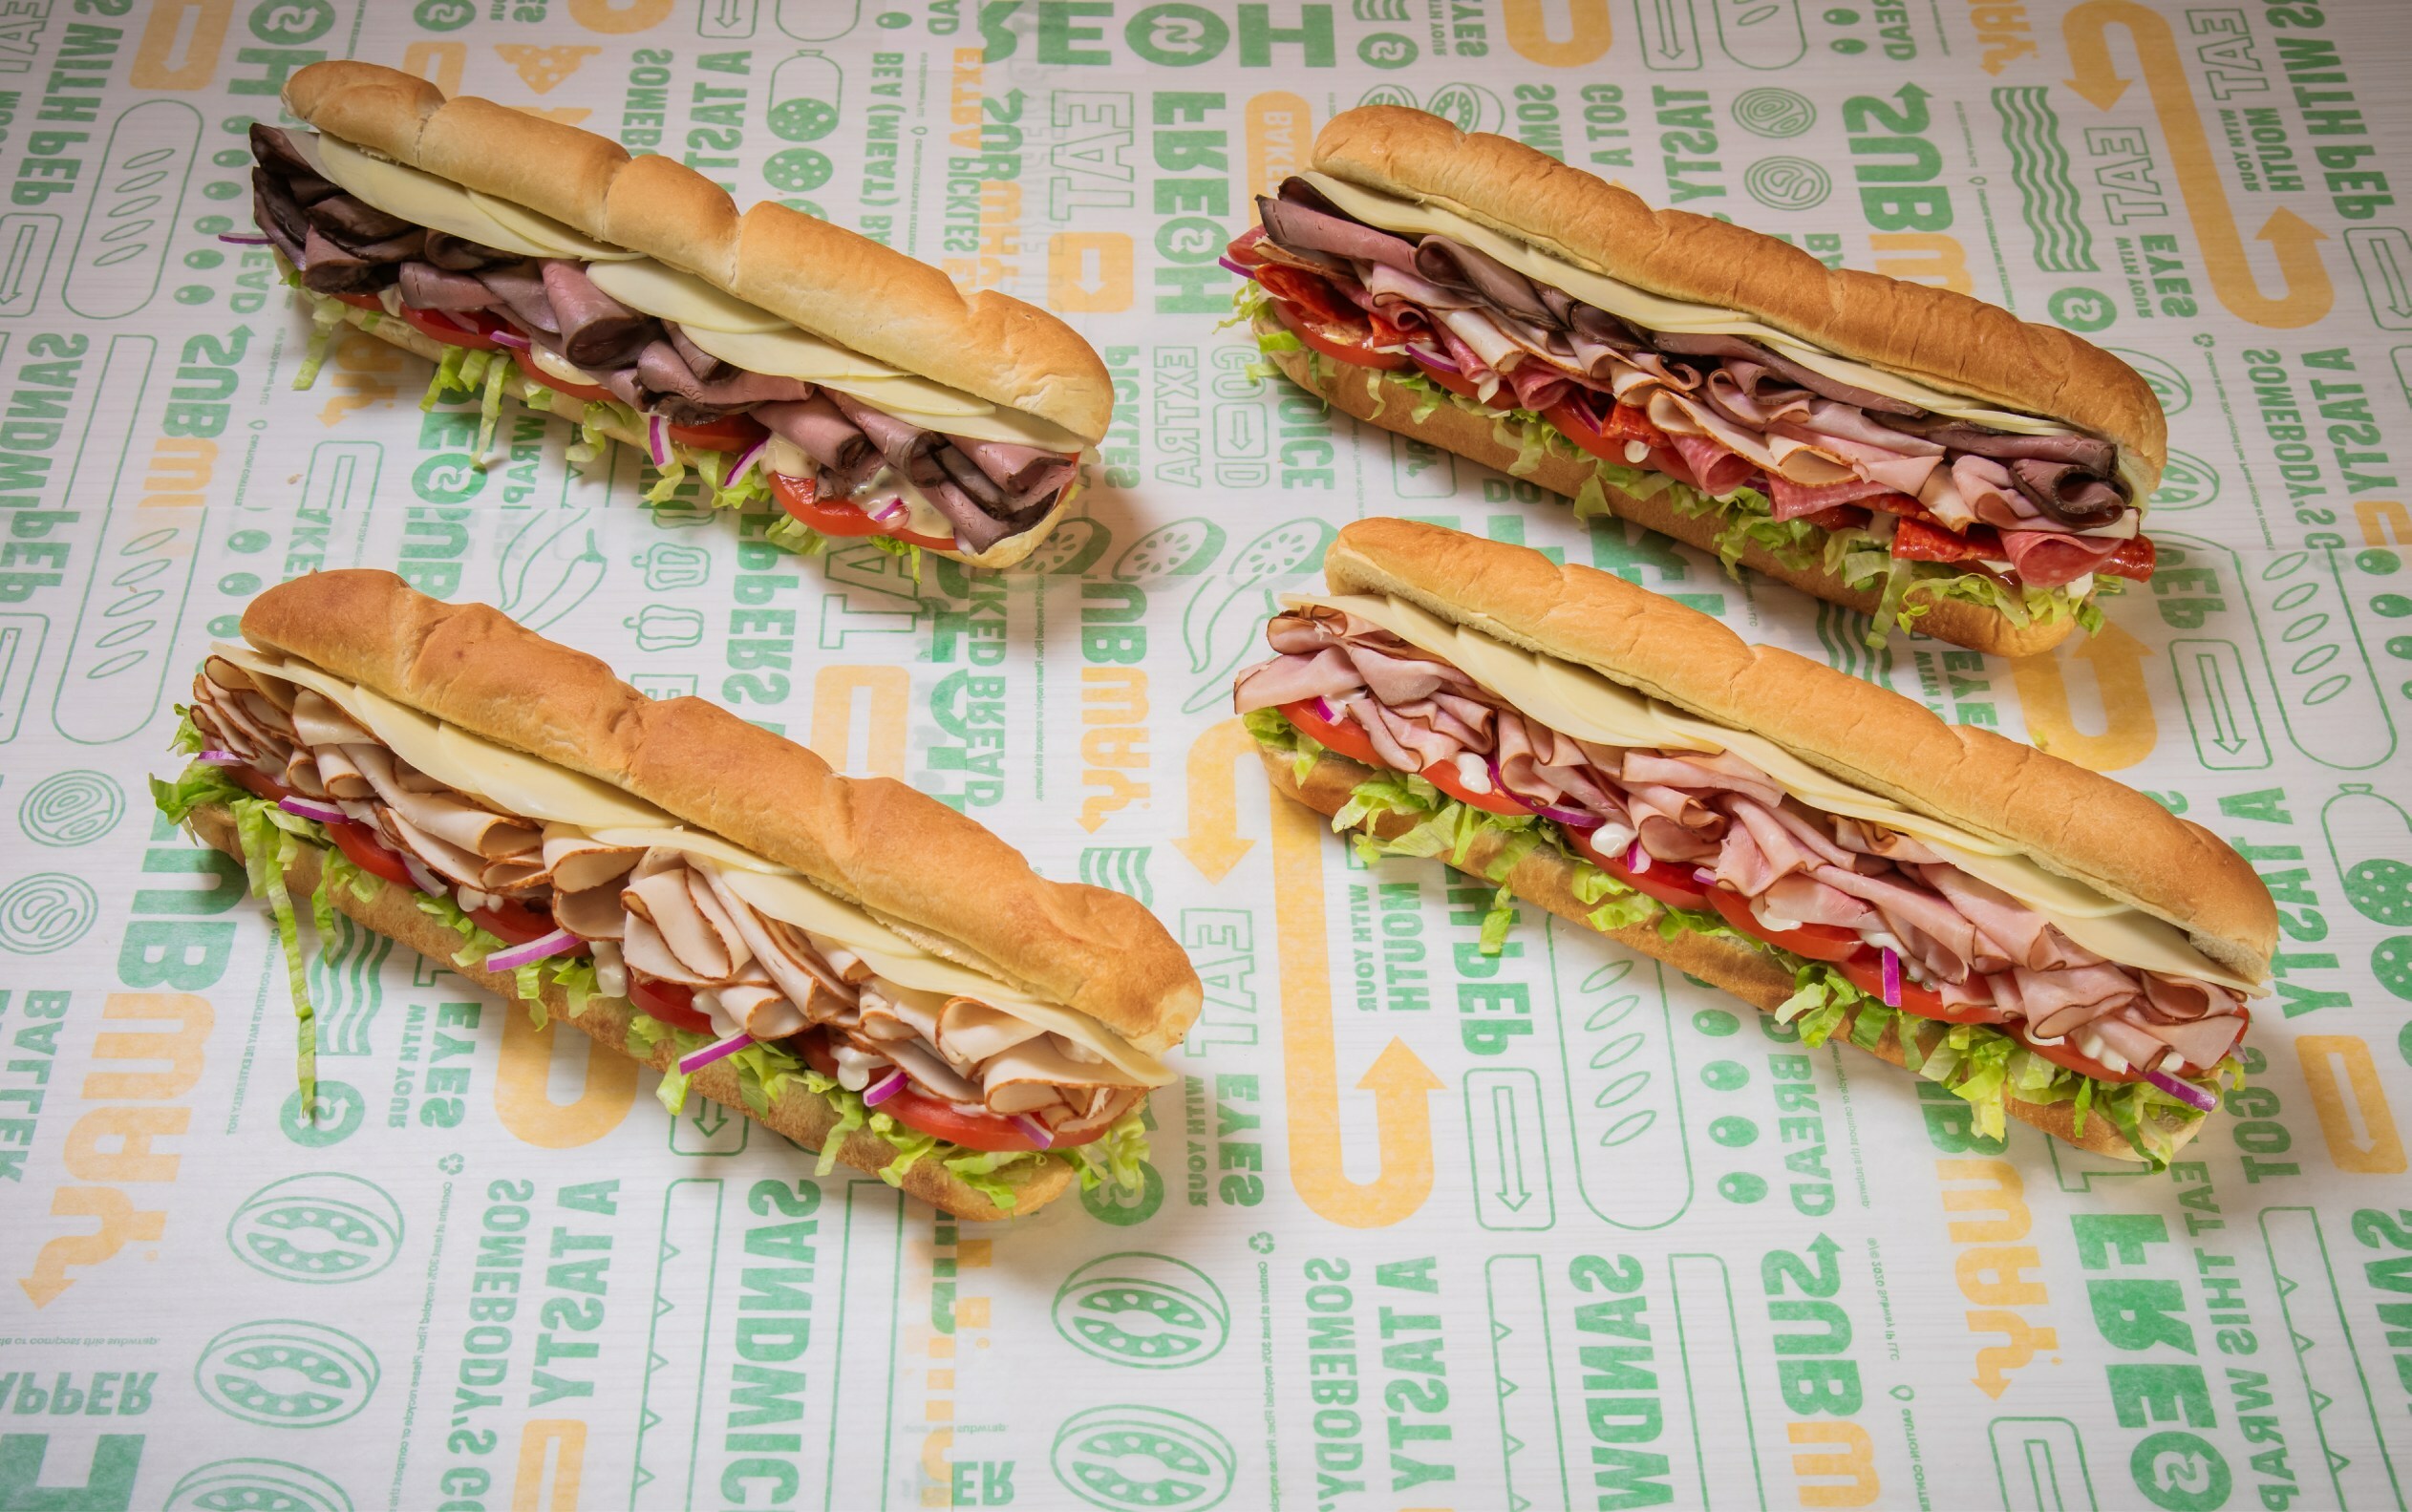 Subway’s new Deli Heroes line-up, featuring freshly sliced meats. Subway has a new Name Change campaign that encourages people to enter for a chance to win free subs for life if they change their name.